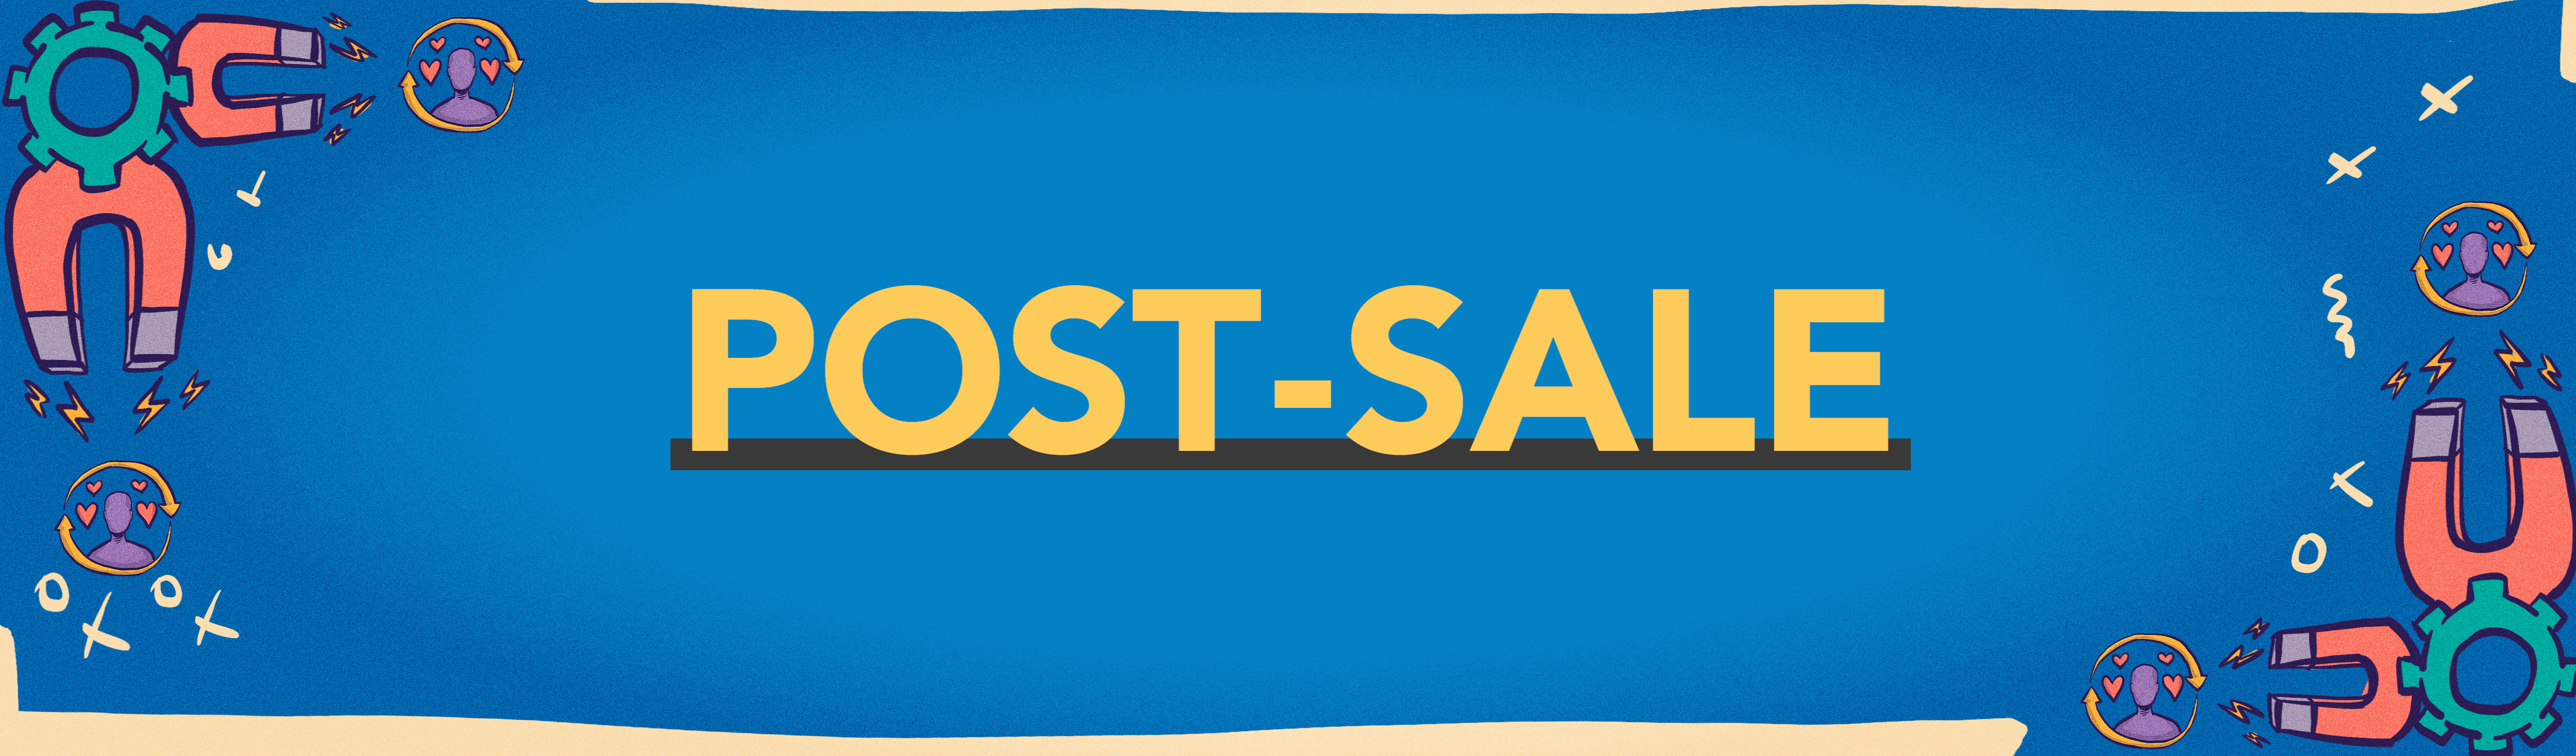 post sale - category